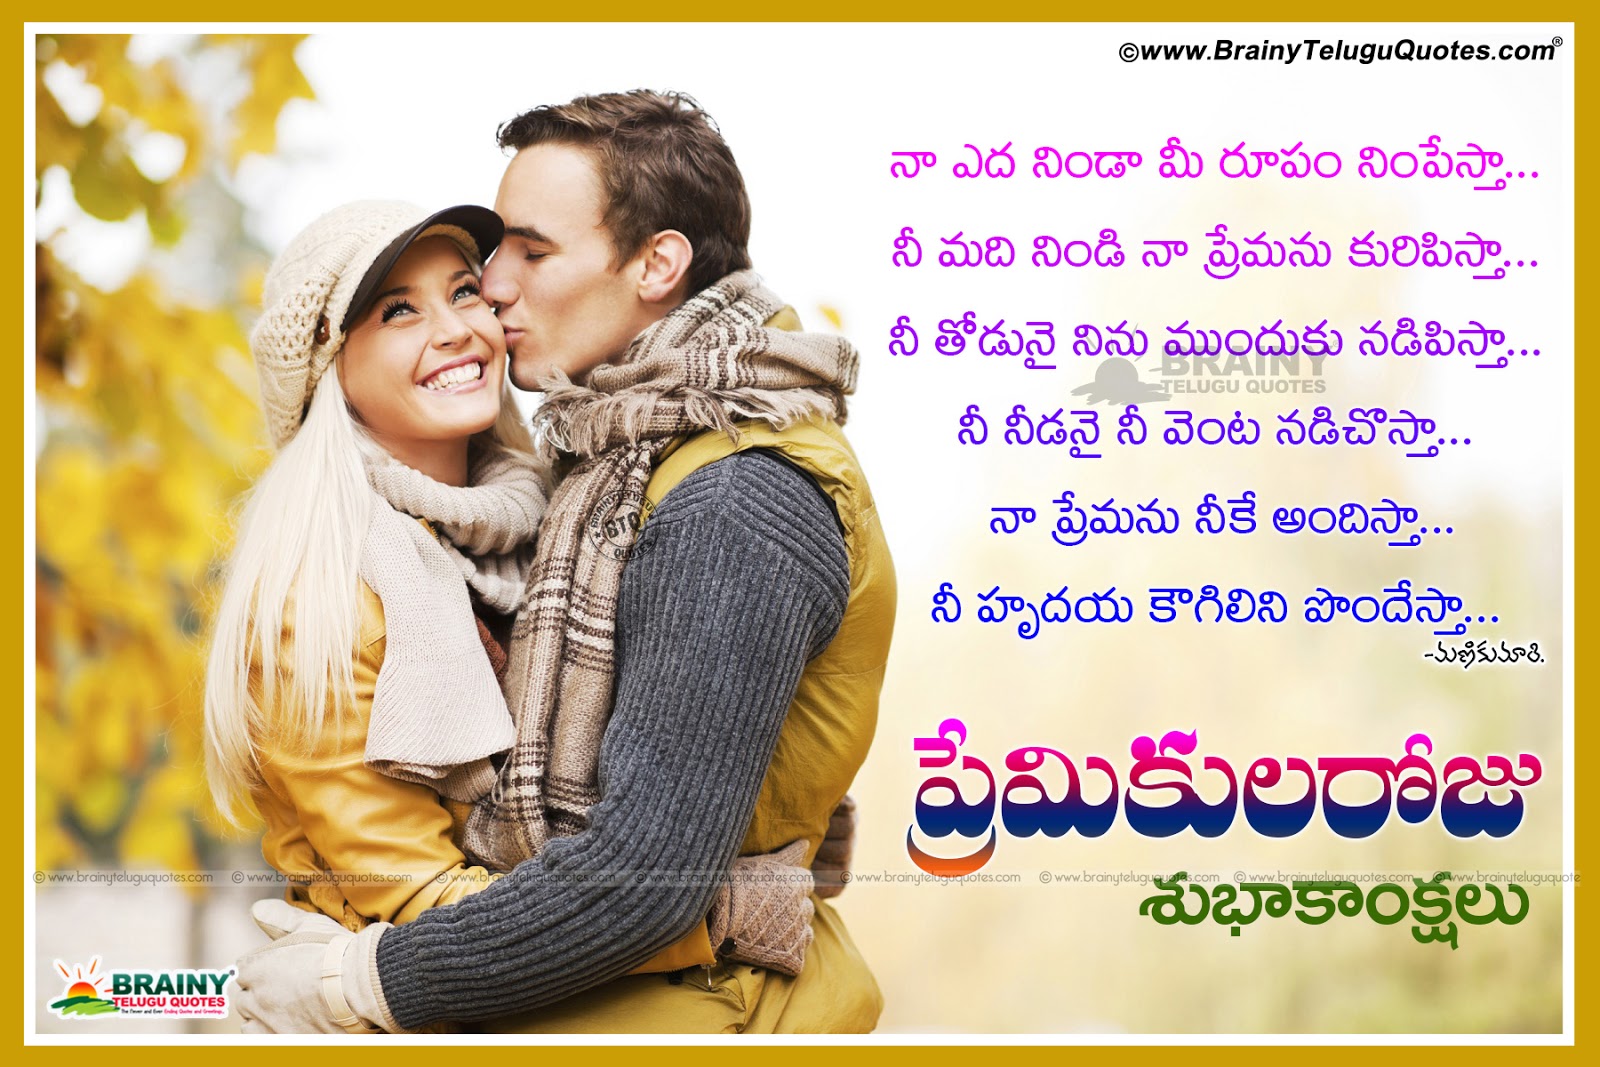 Telugu Valentines day Wishes With Couple Hd Wallpapers-Telugu Love